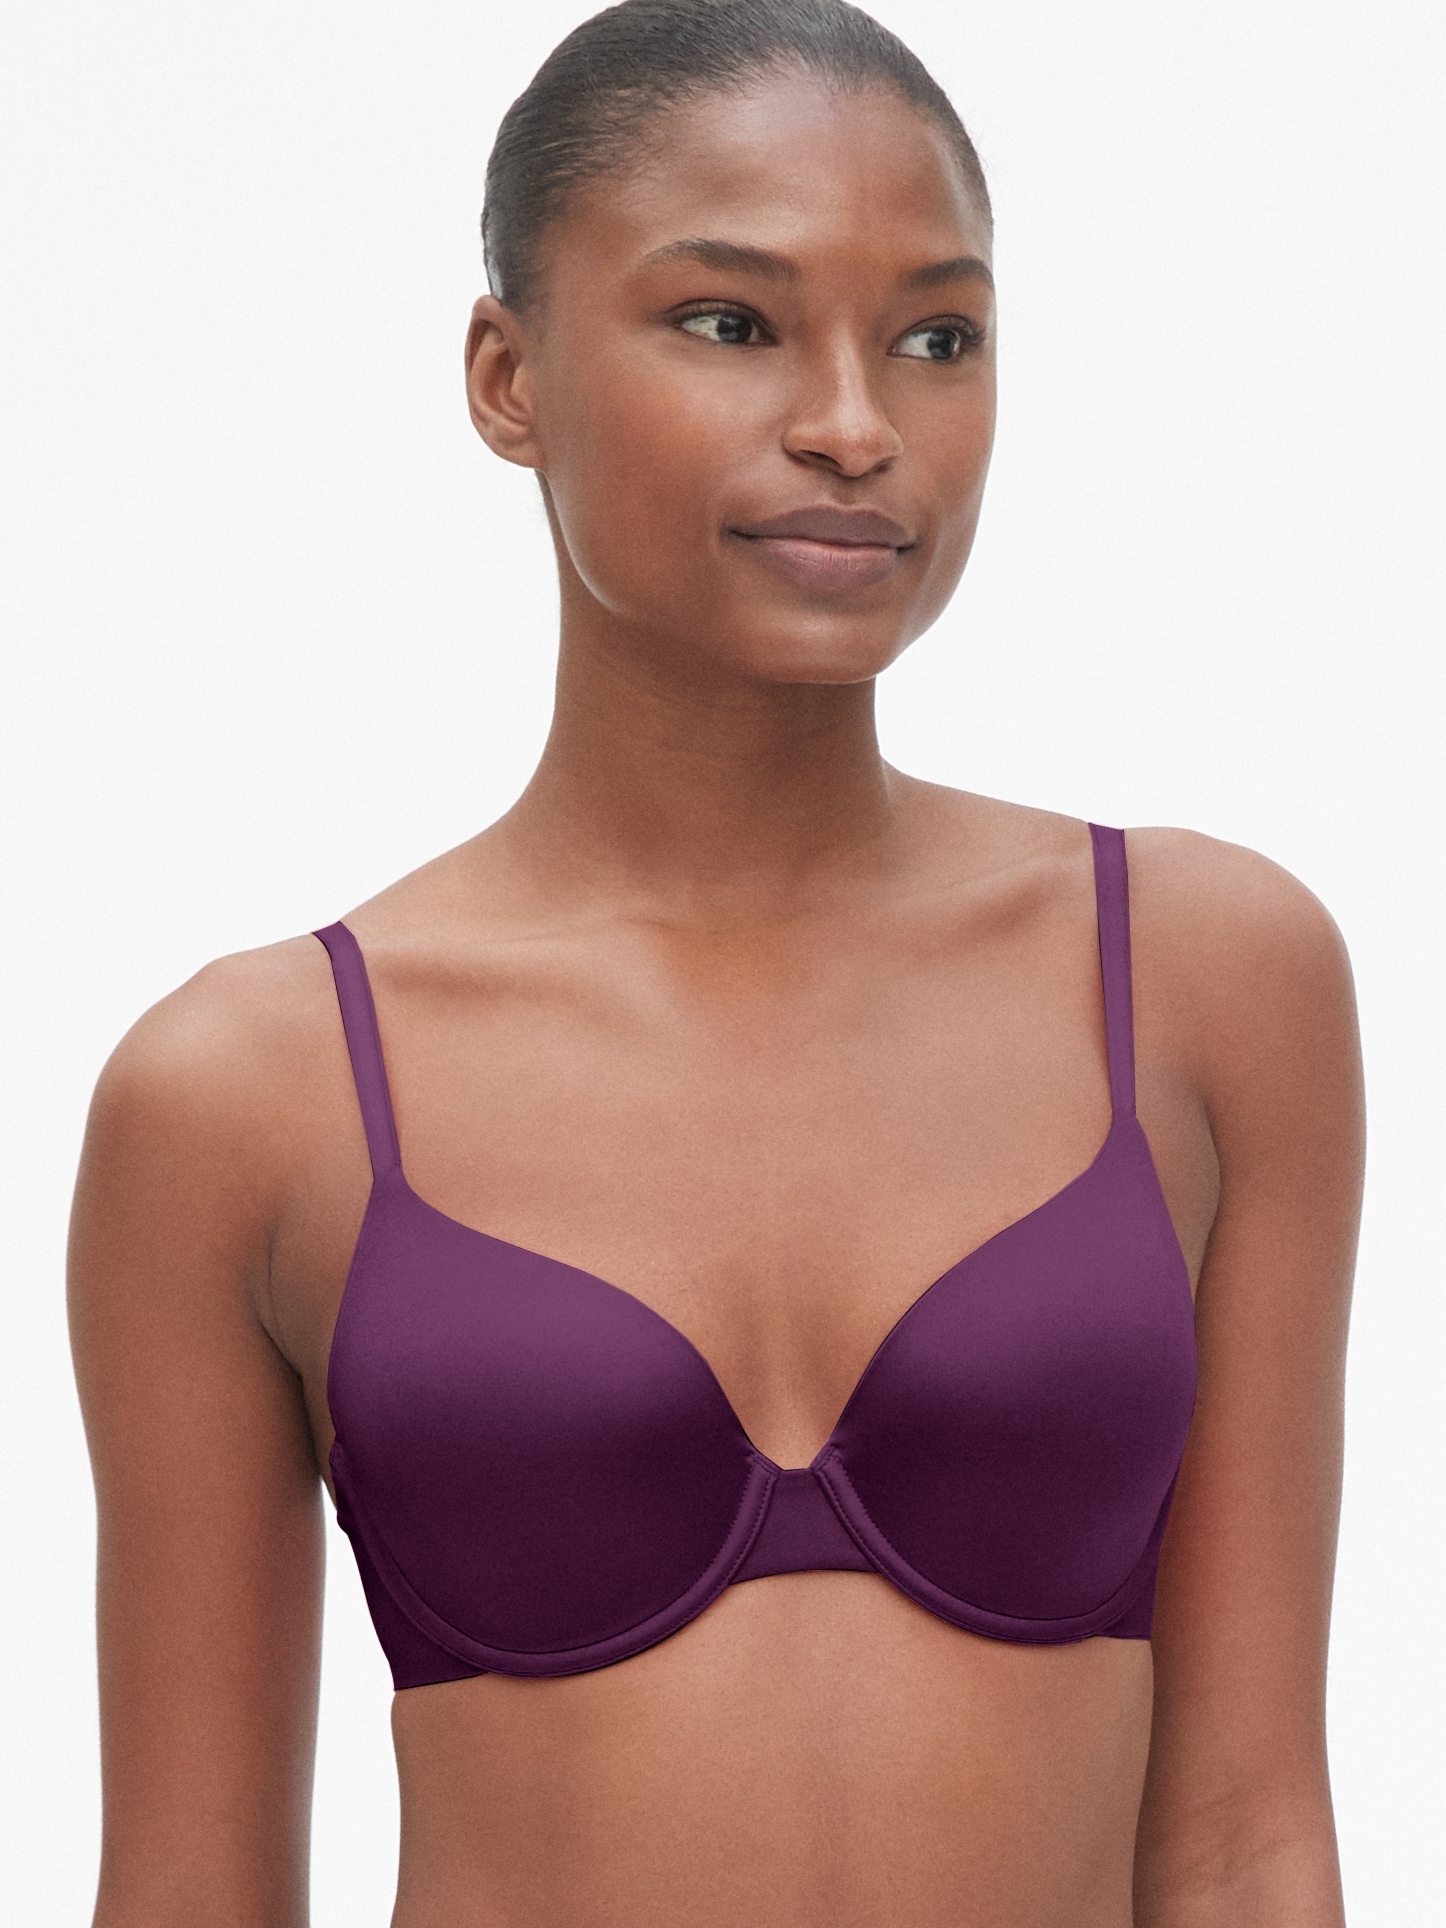 Mending The Gap - introducing the Bra Cover! - The Barely B's